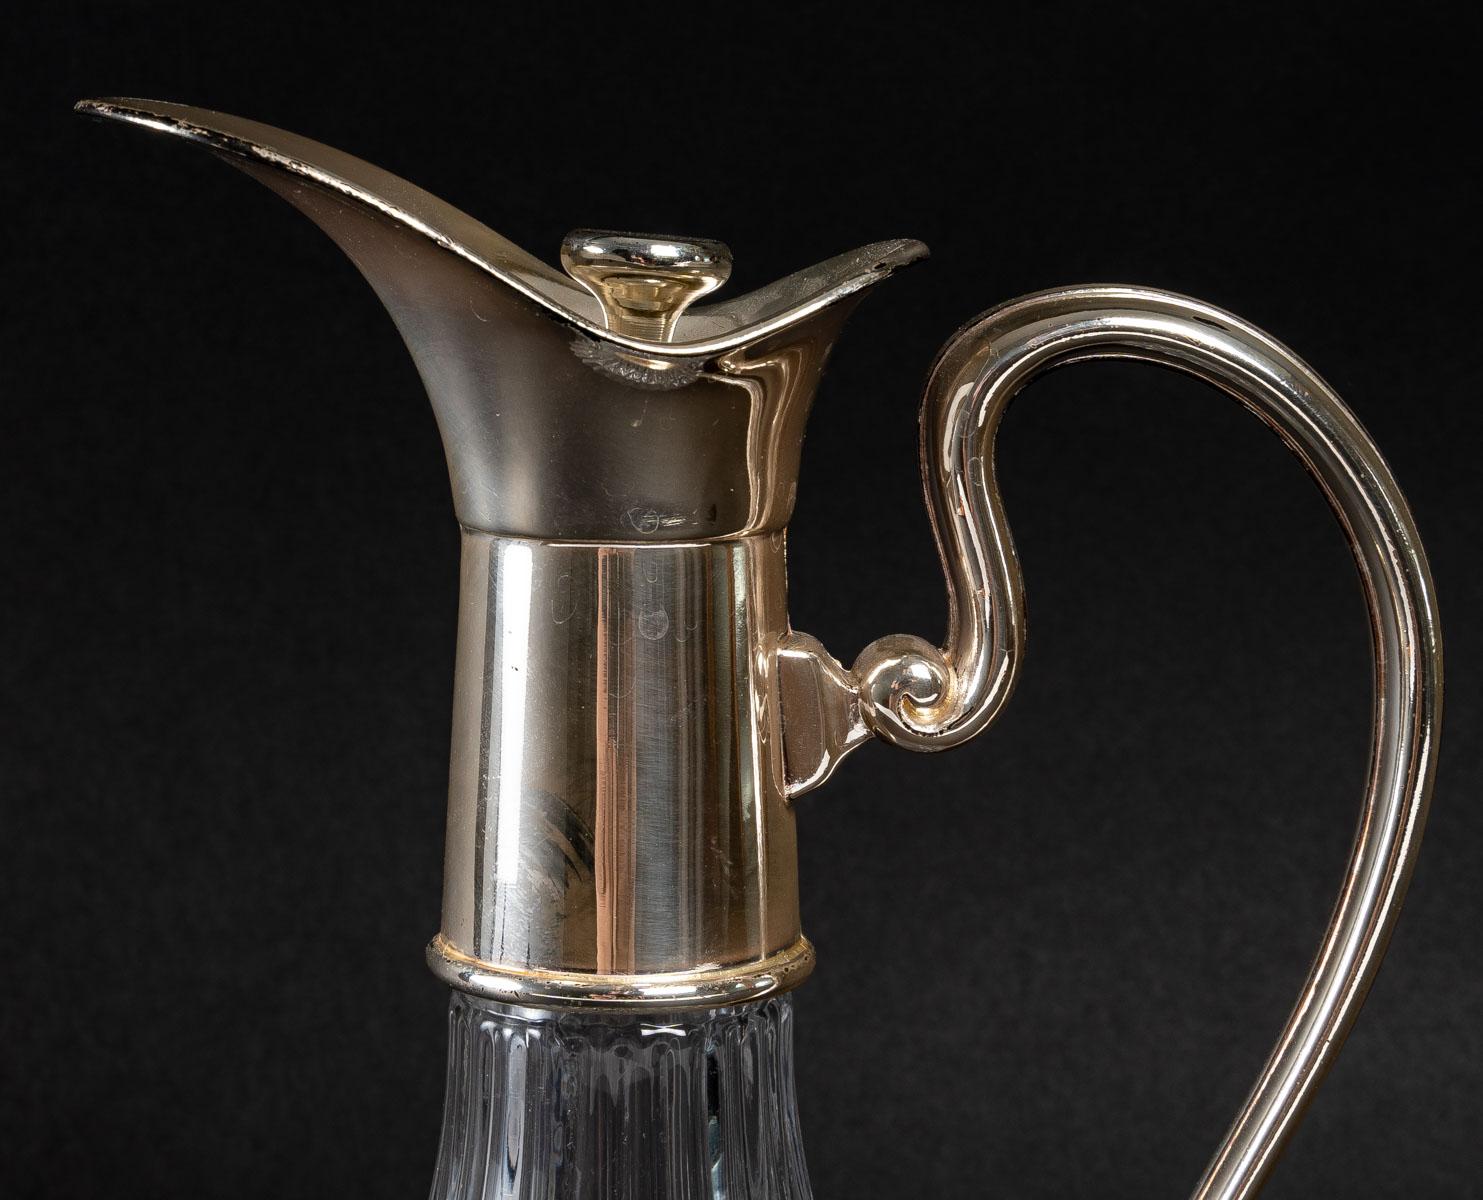 European Decanter and Its Stopper, 20th Century